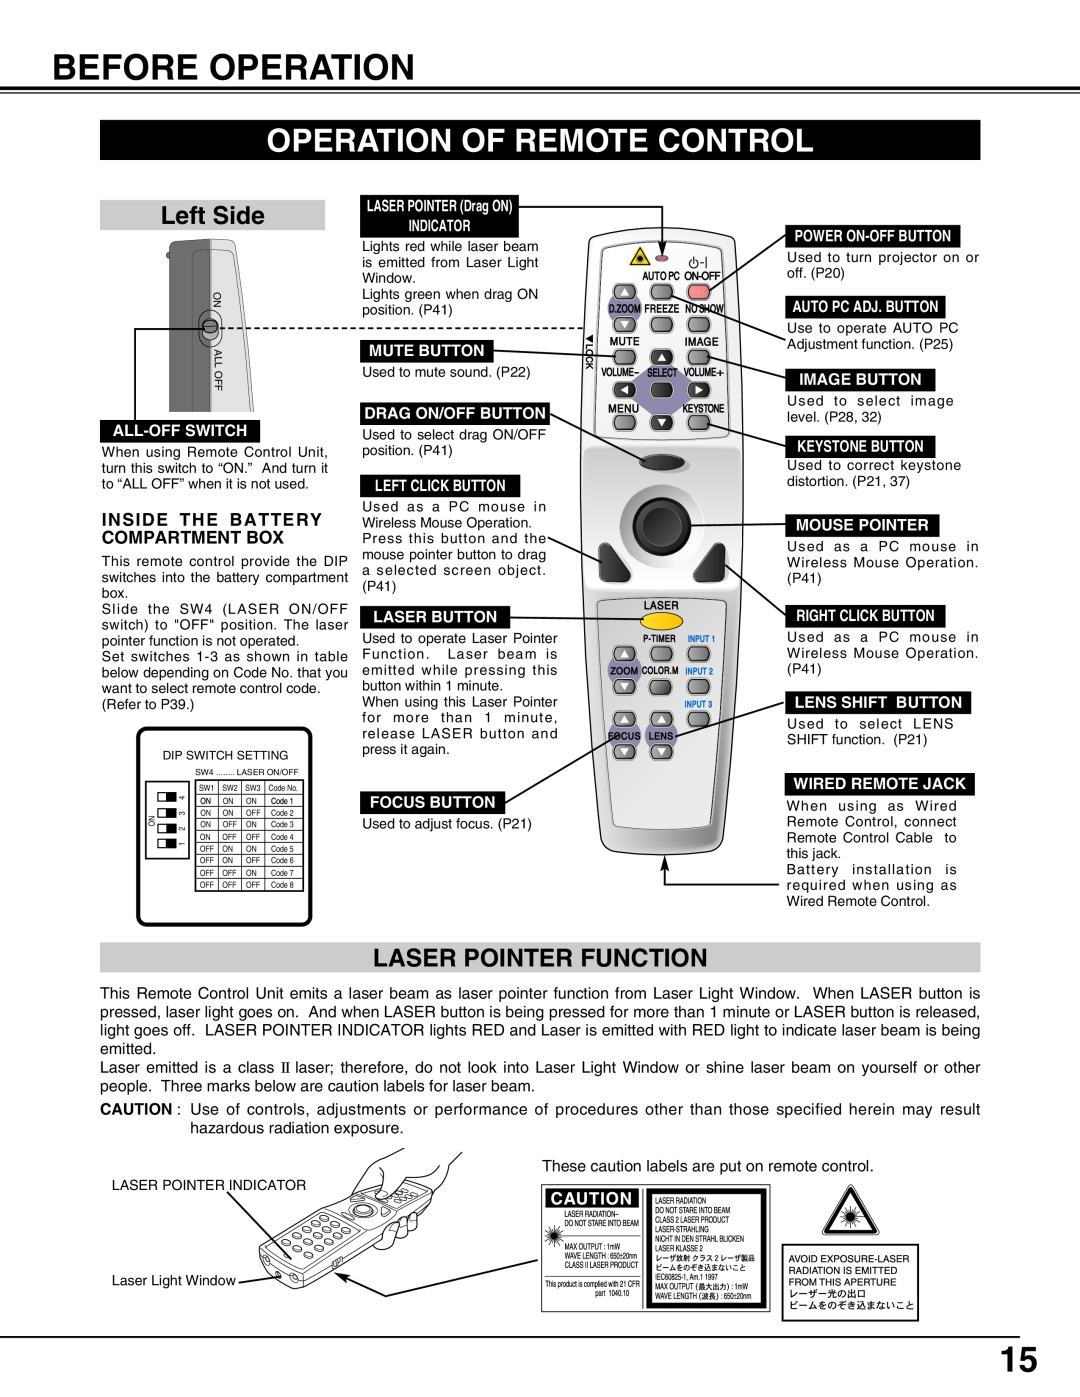 Eiki LC-X60 instruction manual Before Operation, Operation Of Remote Control, Left Side, Laser Pointer Function 